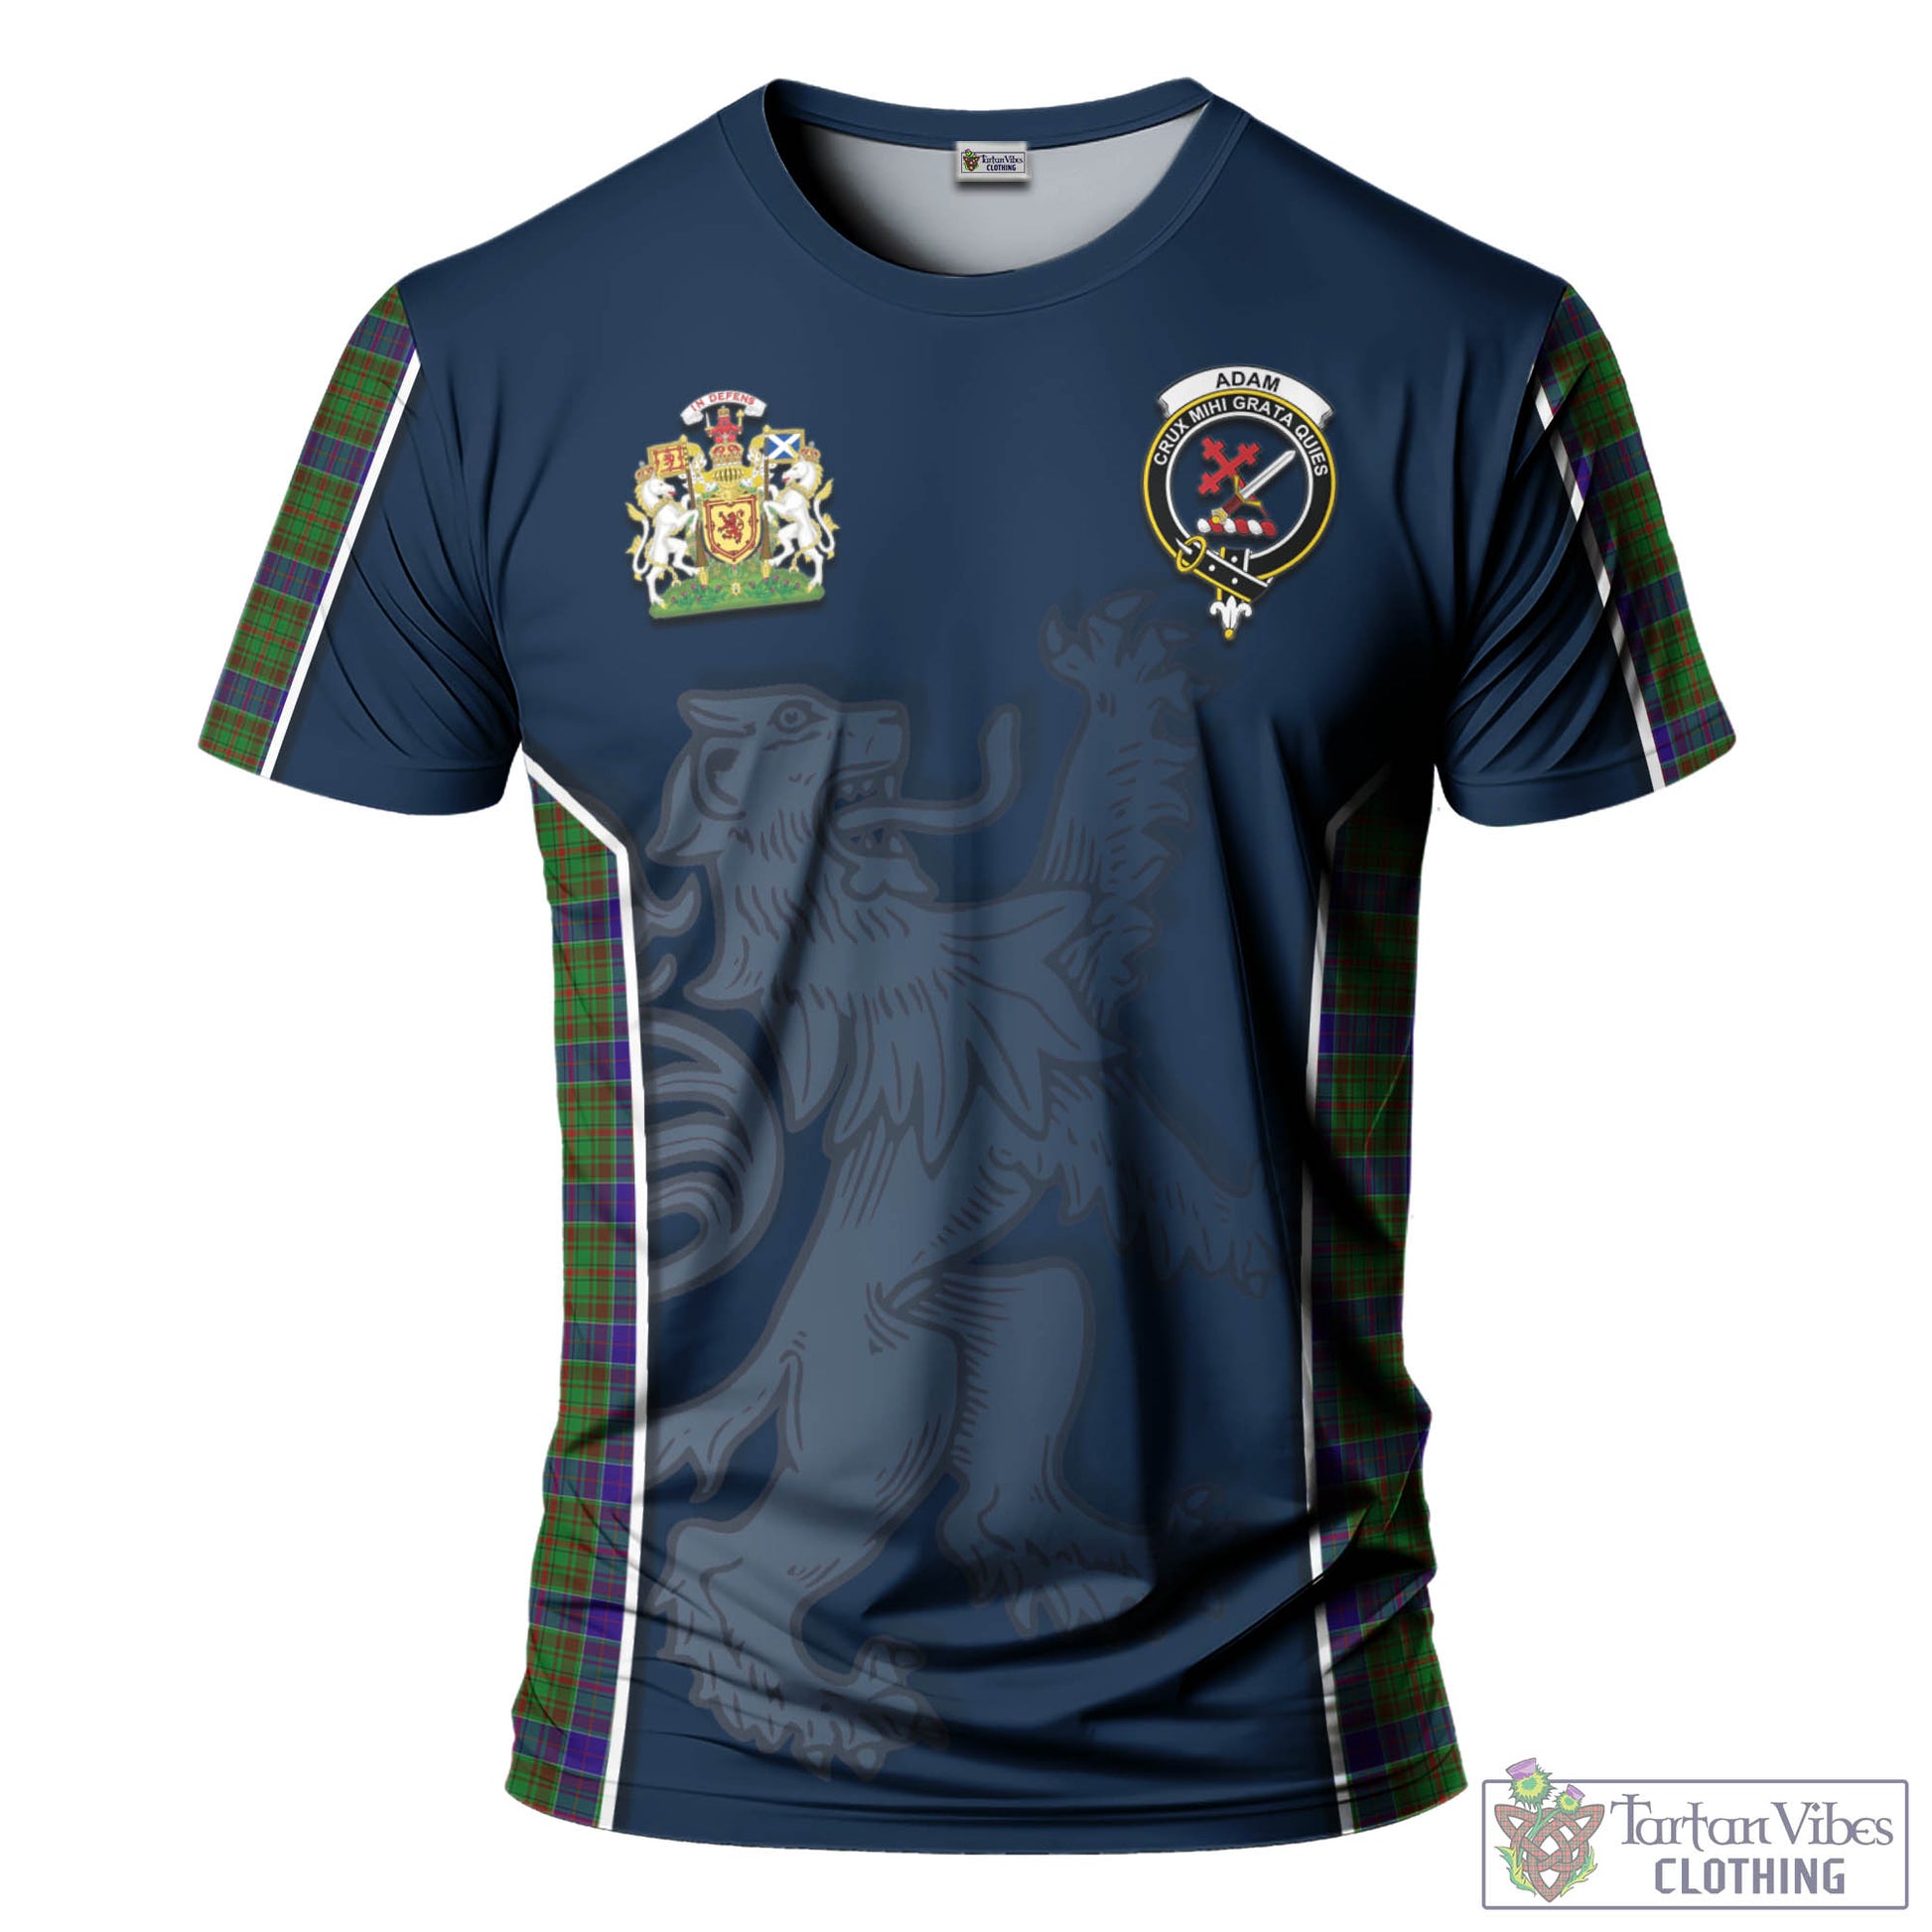 Tartan Vibes Clothing Adam Tartan T-Shirt with Family Crest and Lion Rampant Vibes Sport Style